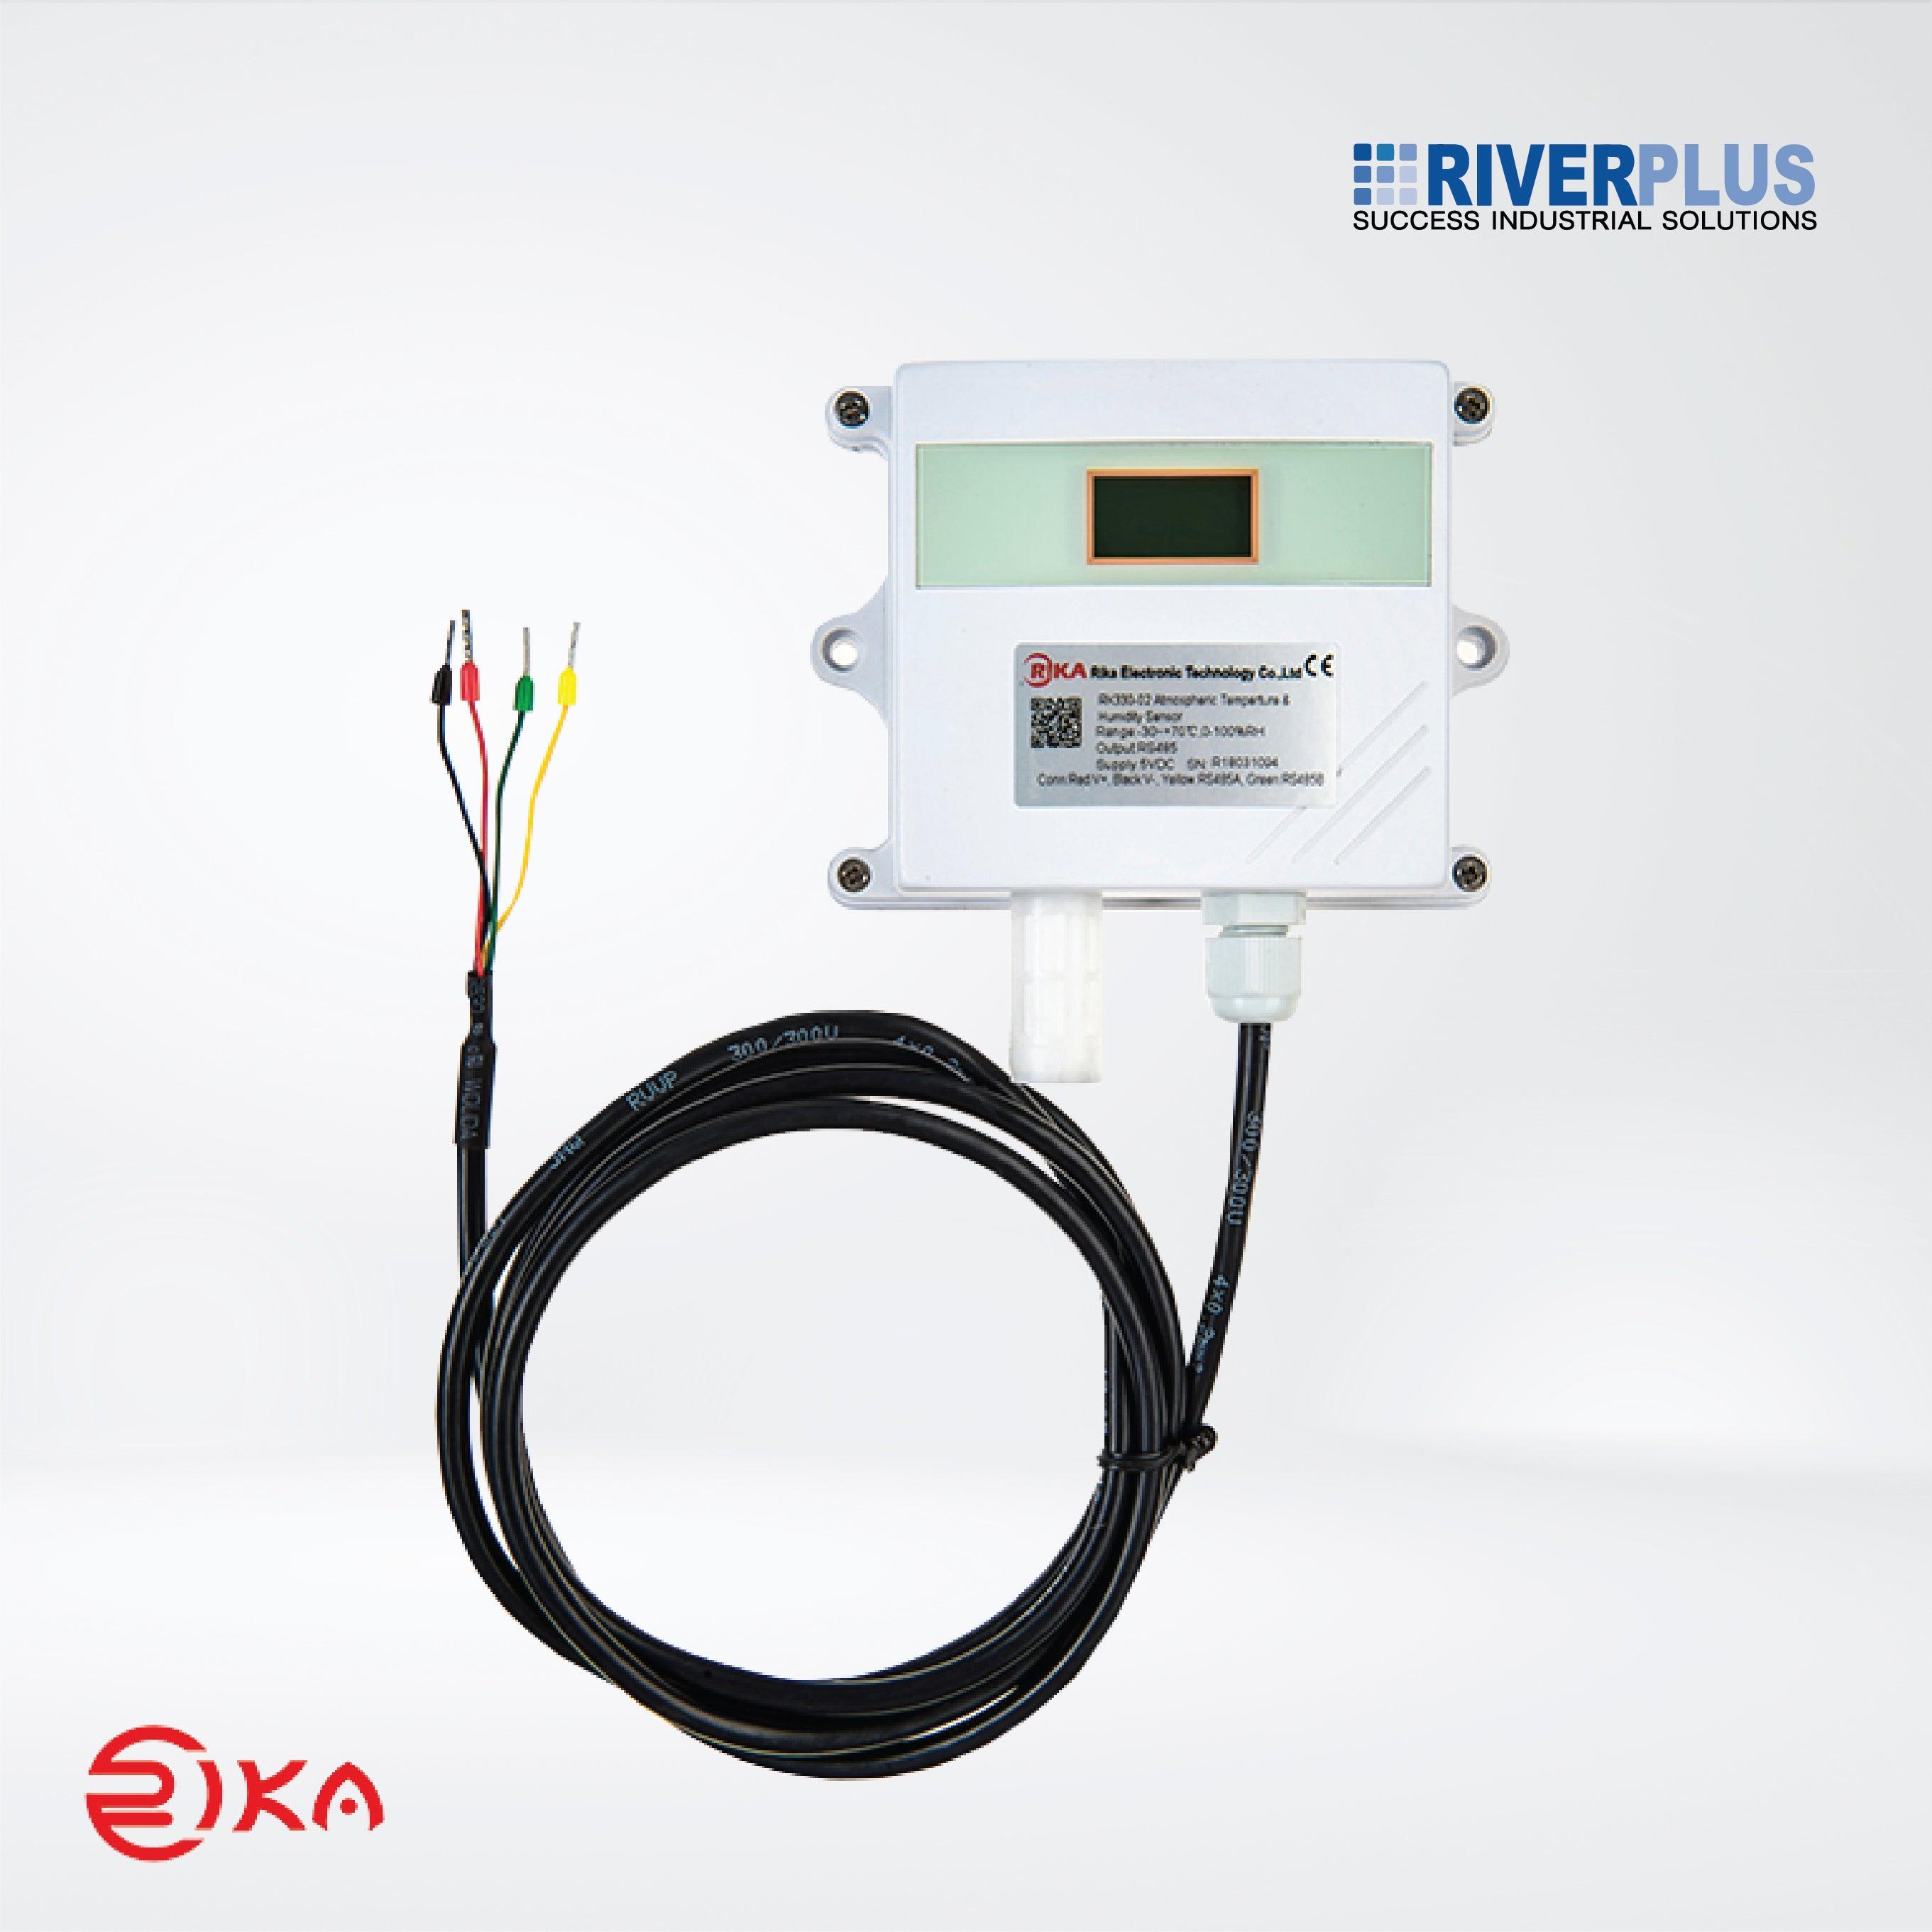 RK330-02 Wall-mounted Ambient Temperature & Humidity Sensor - Riverplus